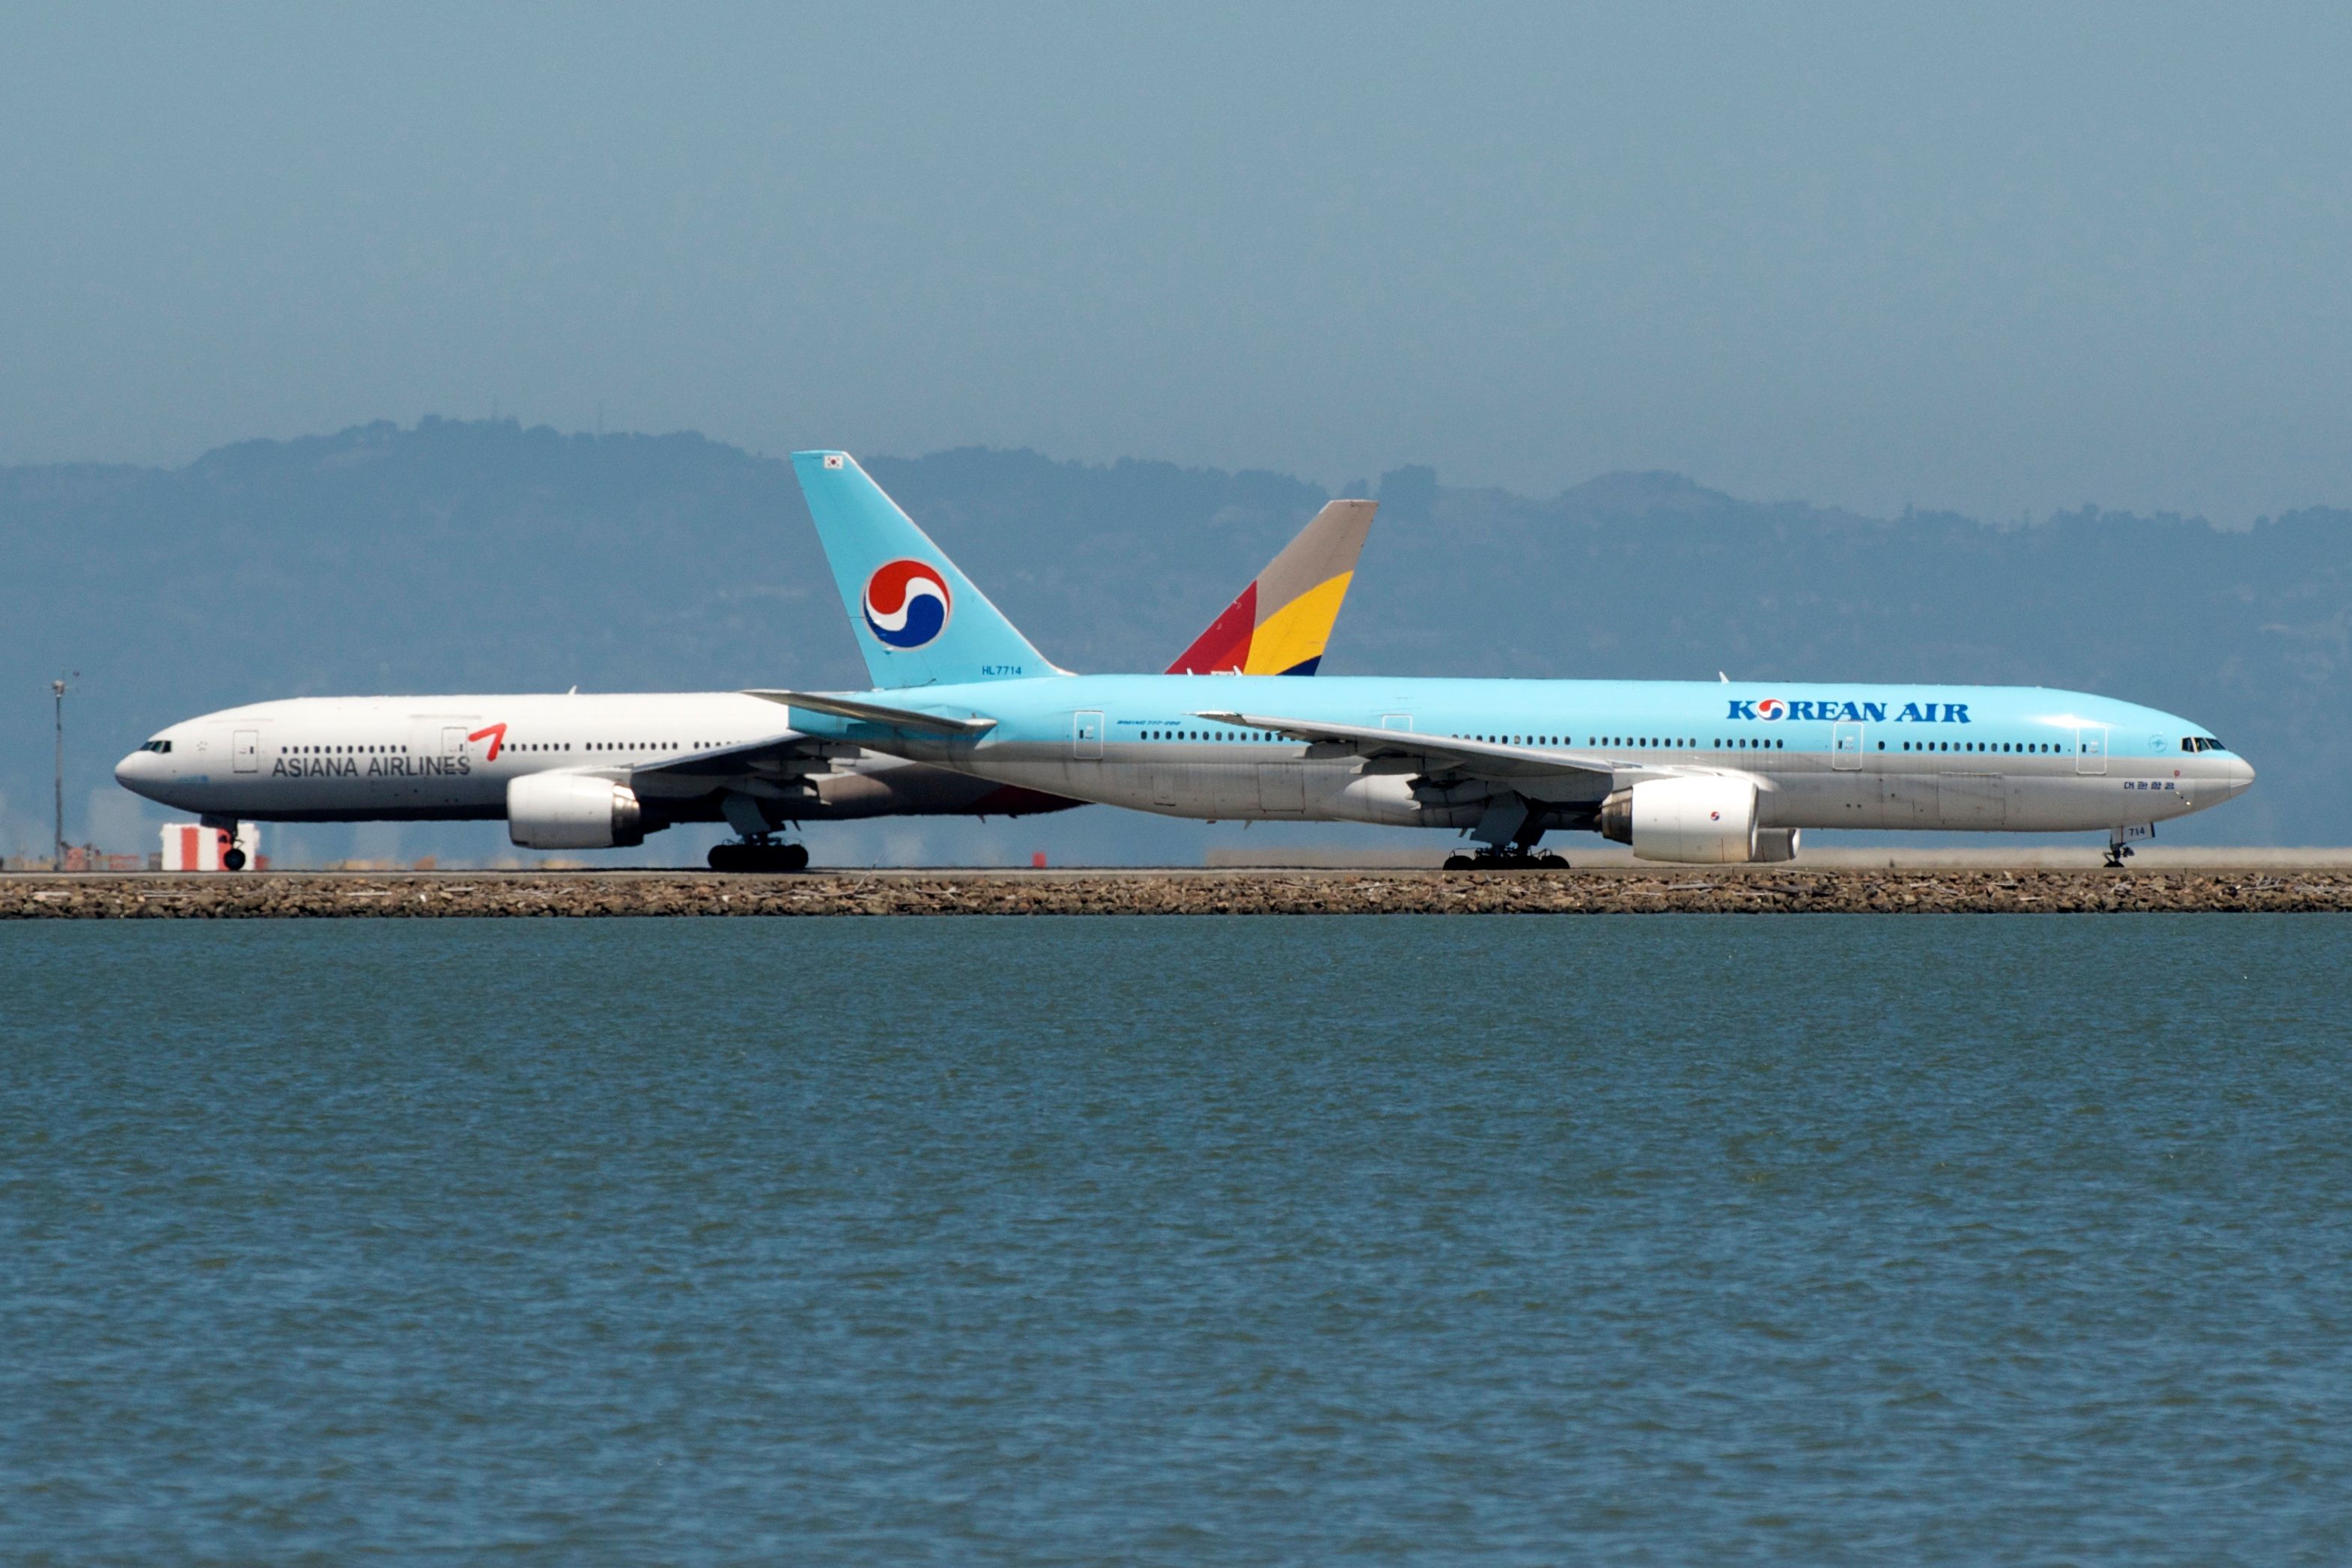 Korean Air and Asiana Airlines